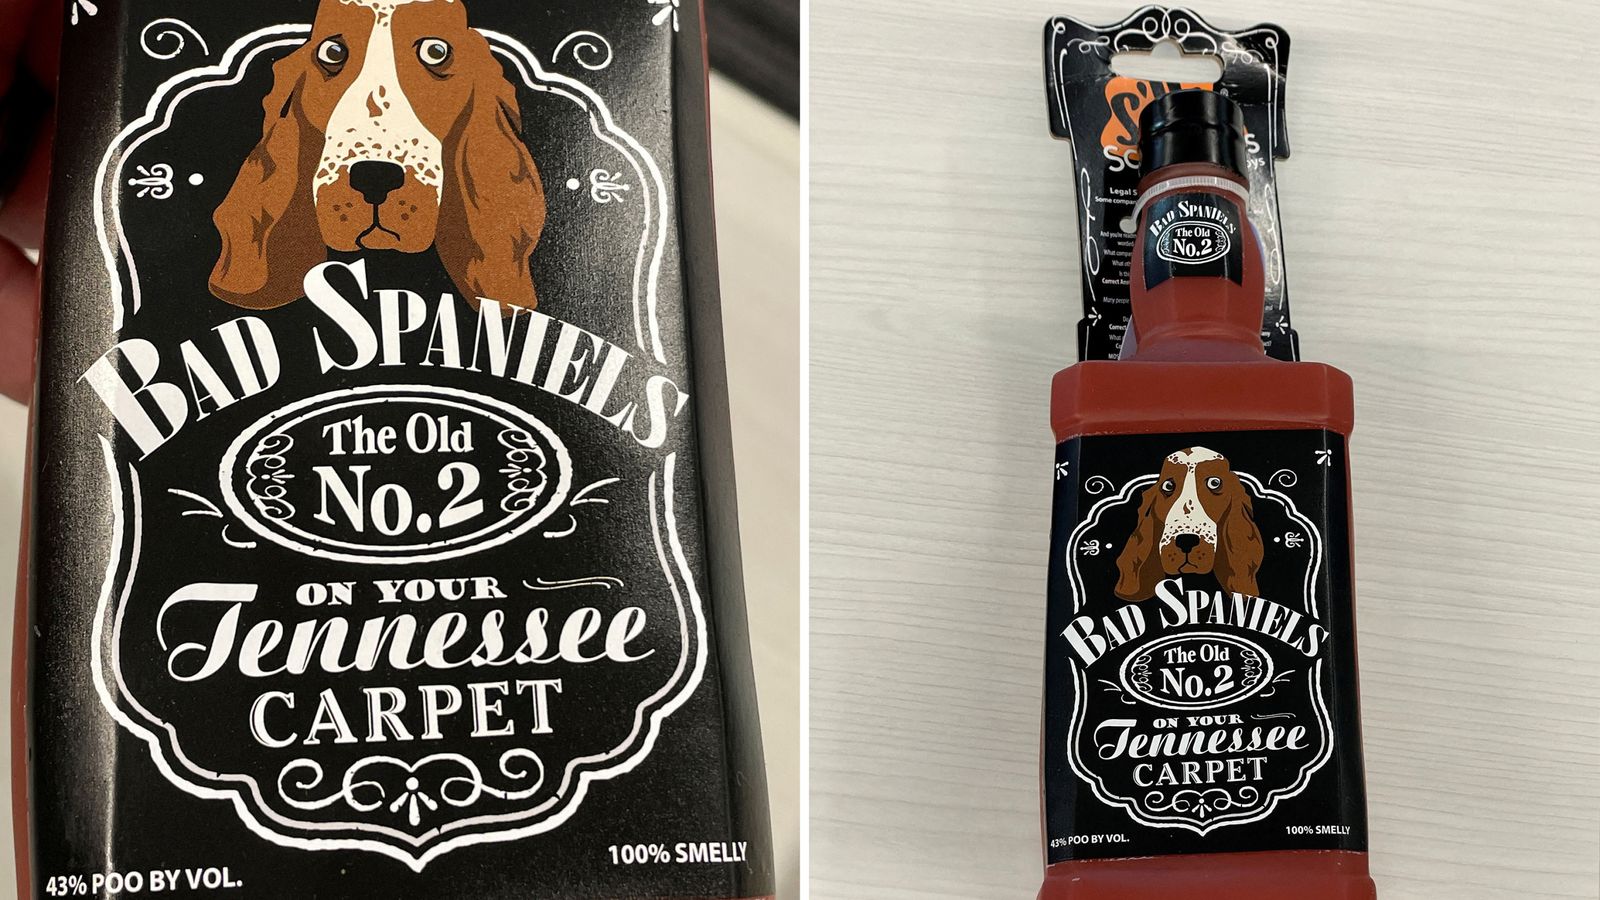 Jack Daniel's and dog toy company go head to head in US Supreme Court